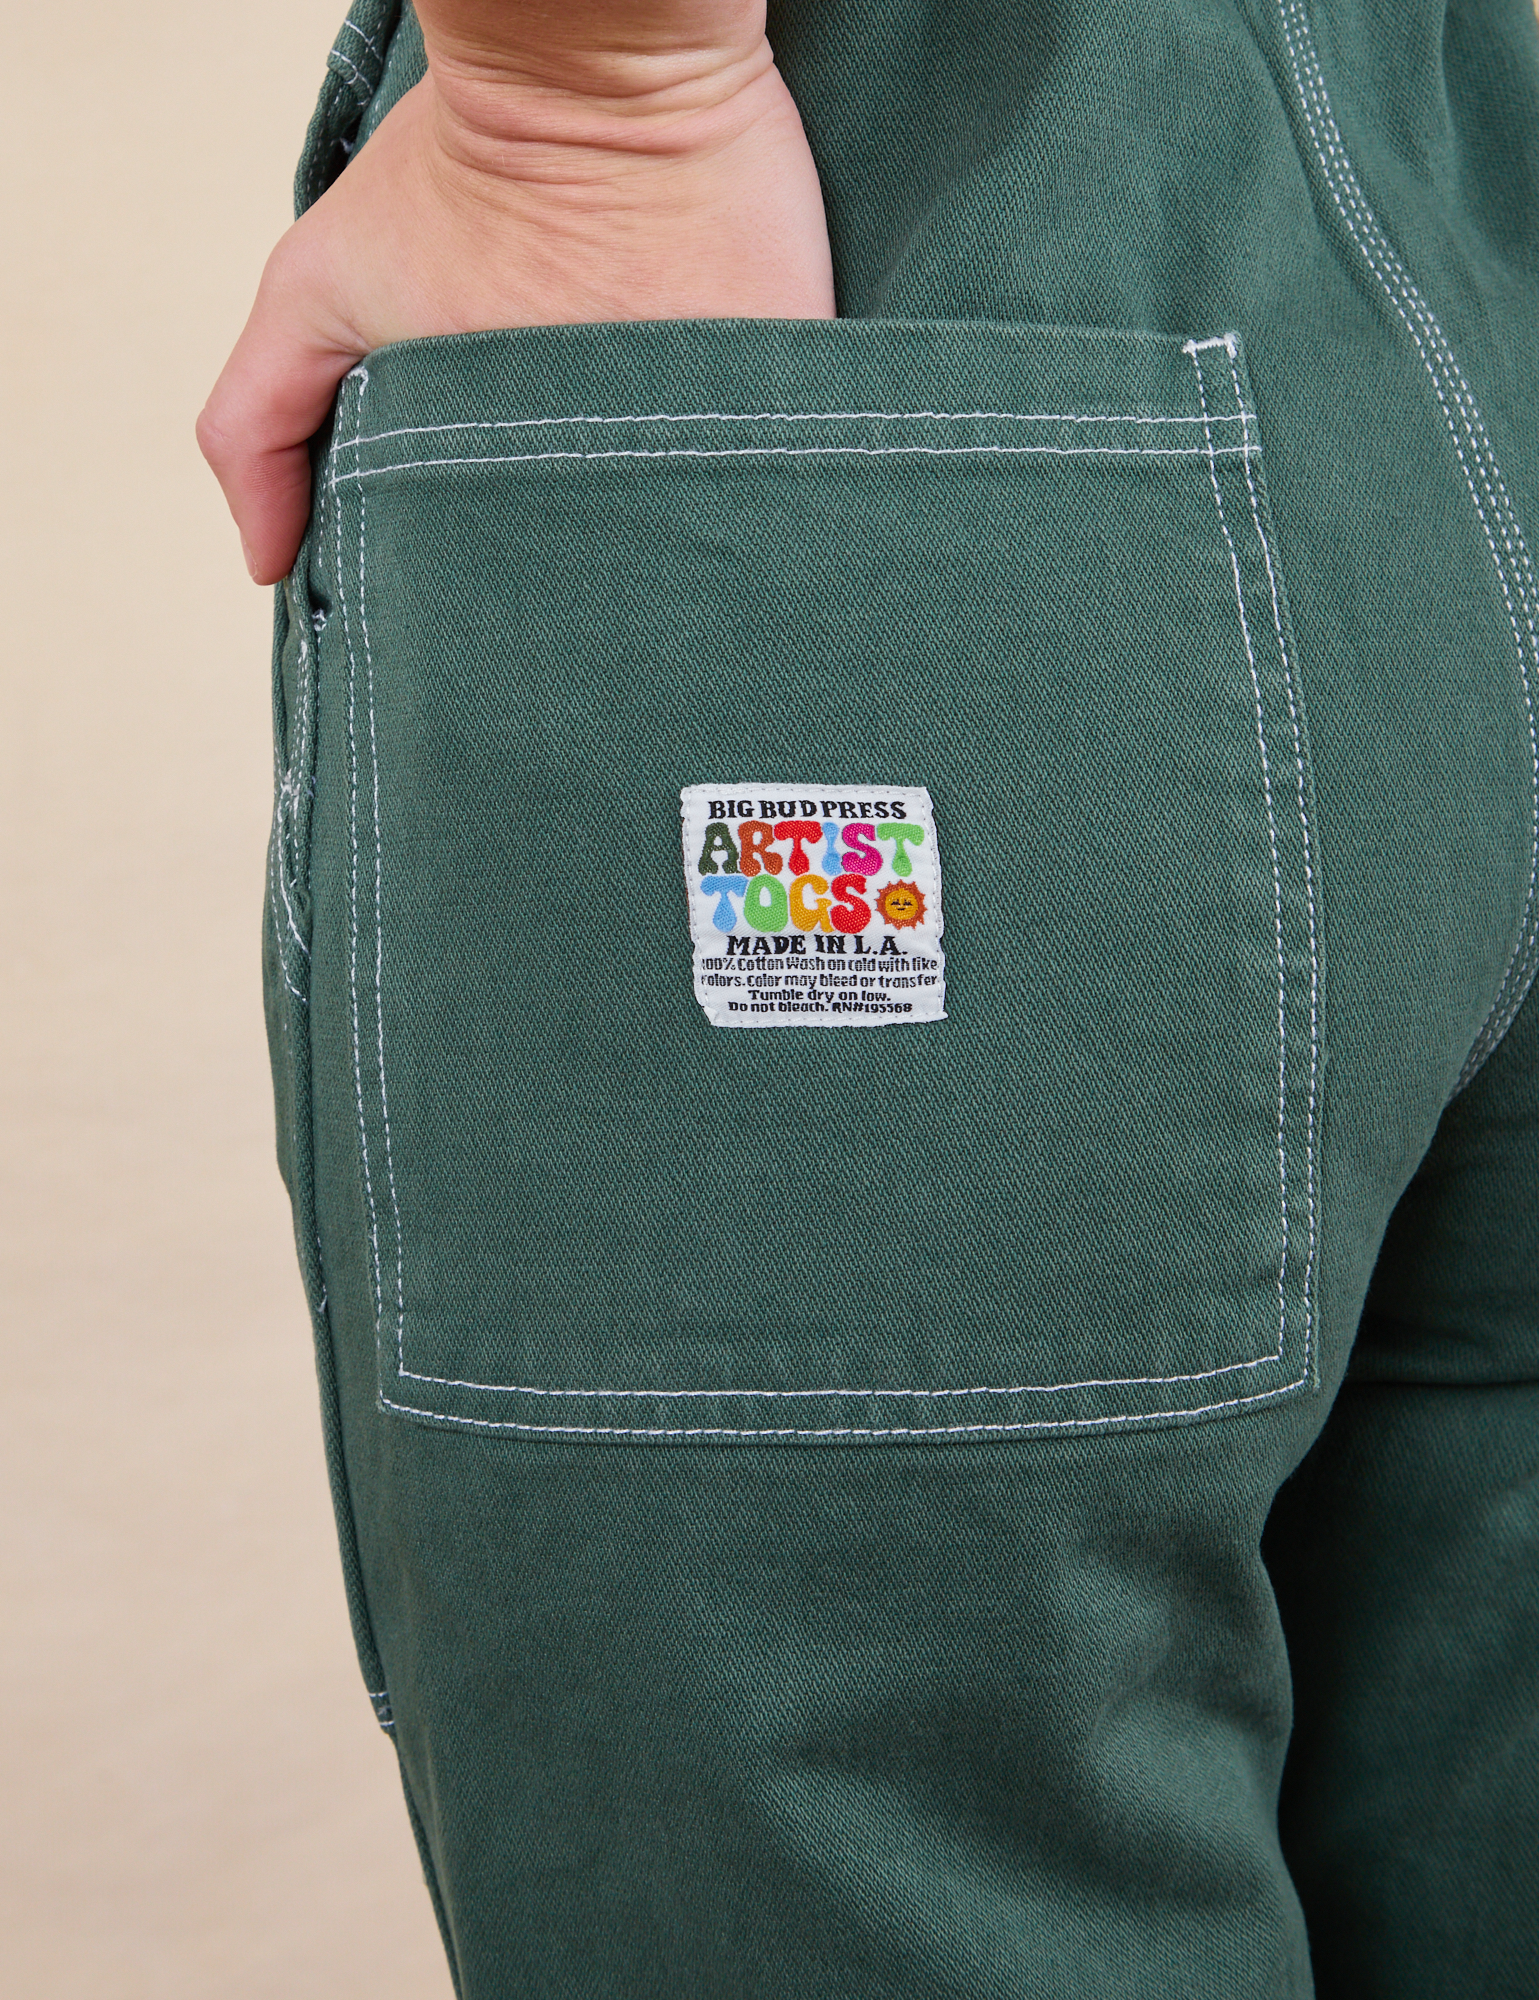 Original Overalls in Dark Emerald Green back pocket close up with Artist TOGS tag